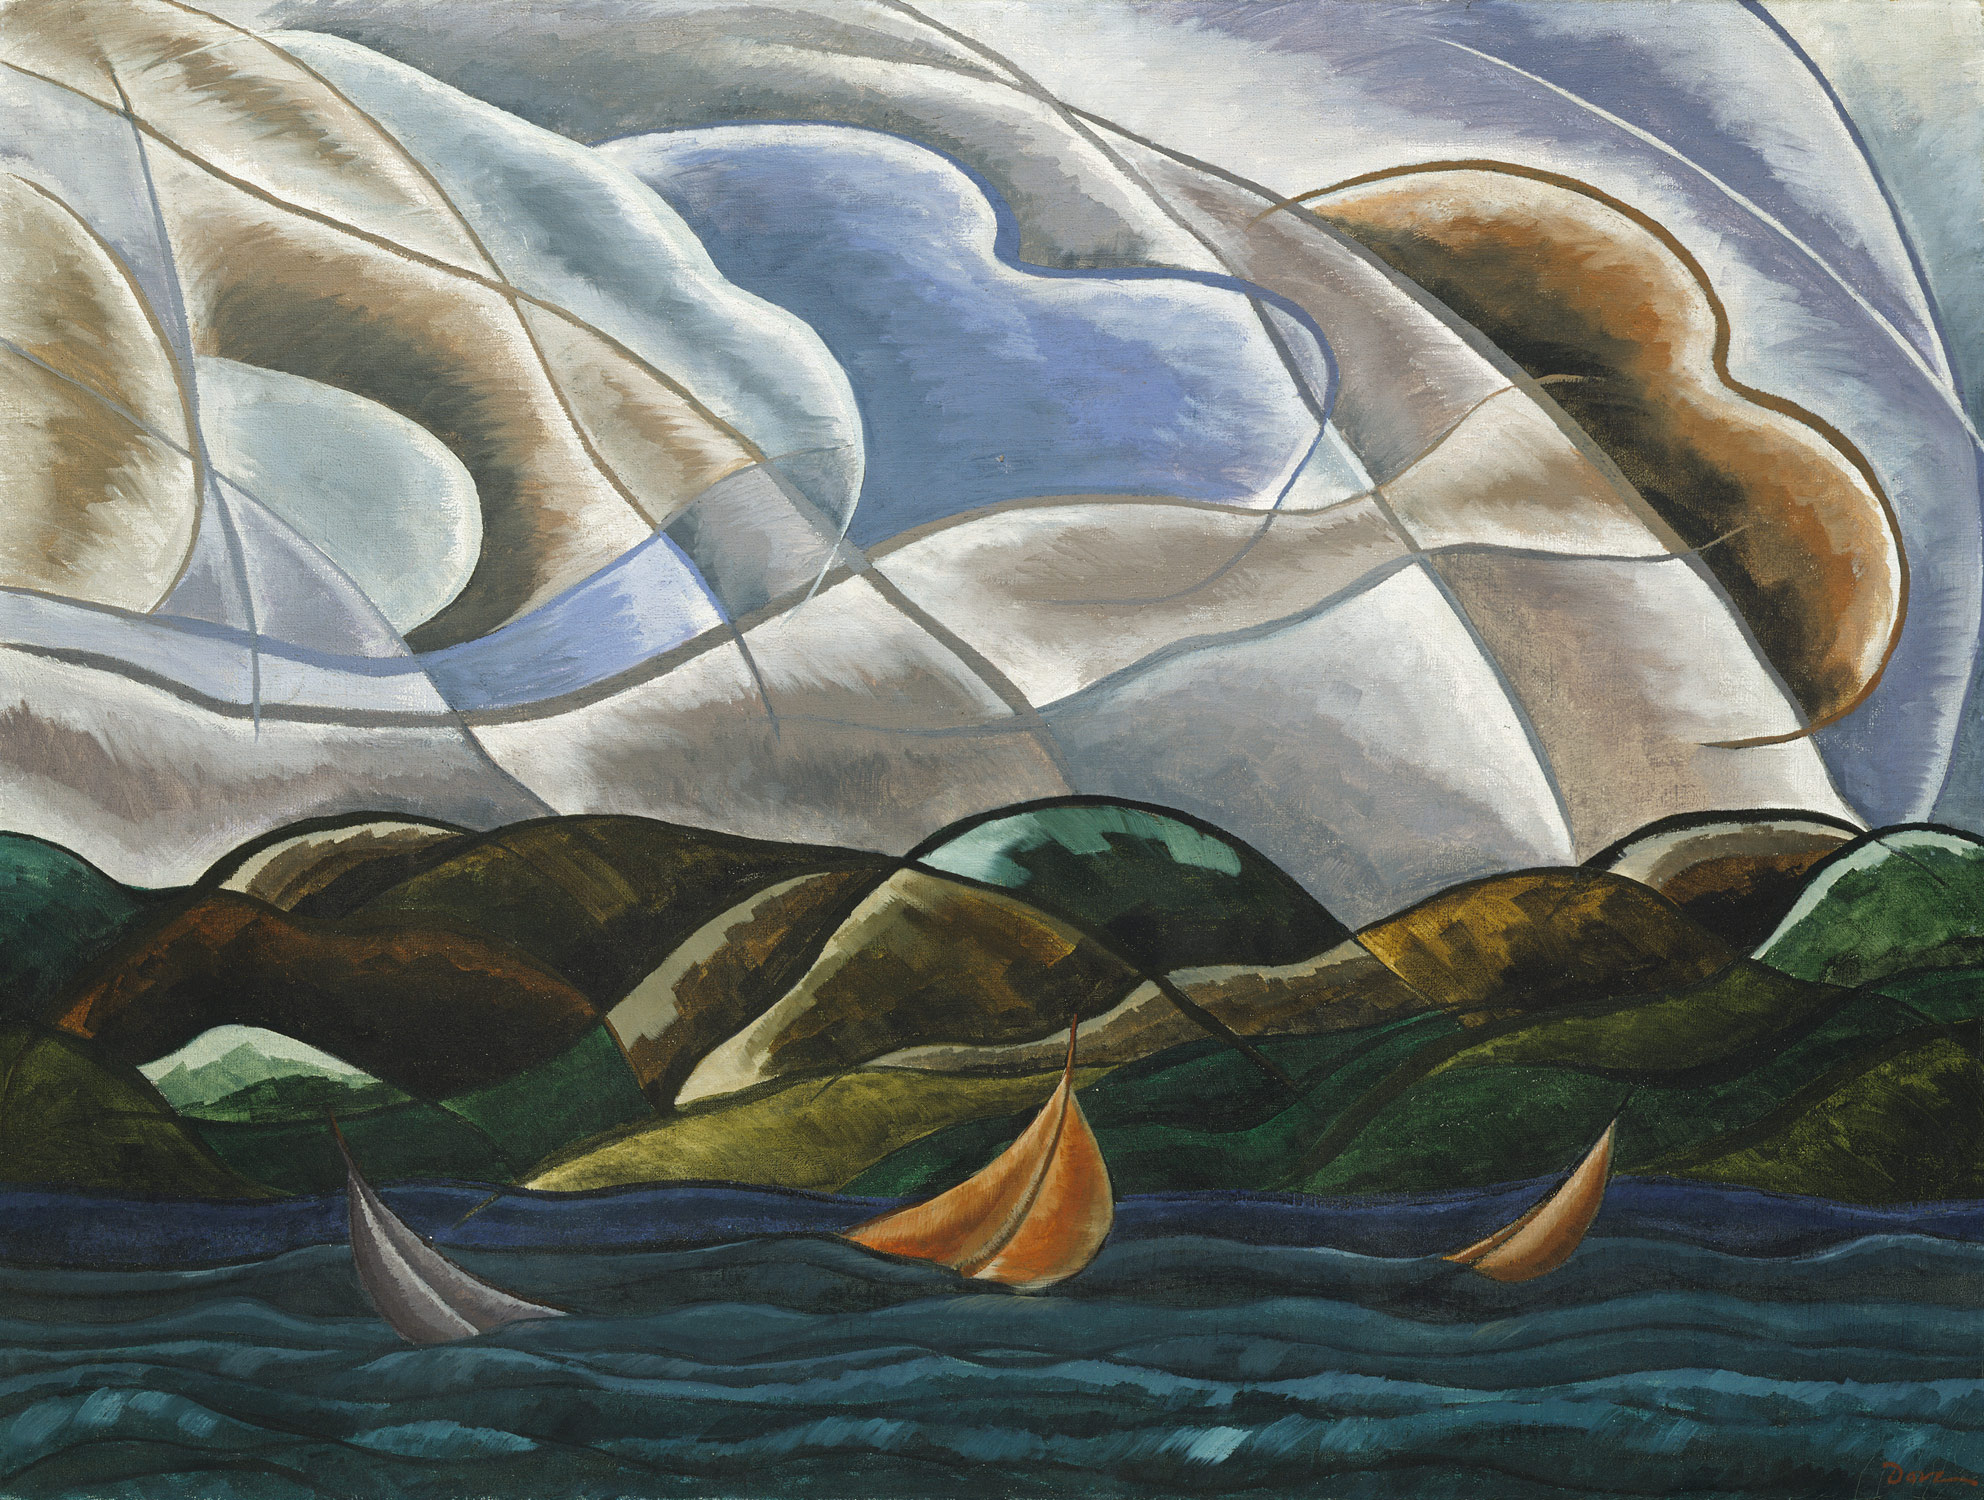 Clouds and Water by Arthur Dove - 1930 - 75.2 x 100.6 cm Metropolitan Museum of Art